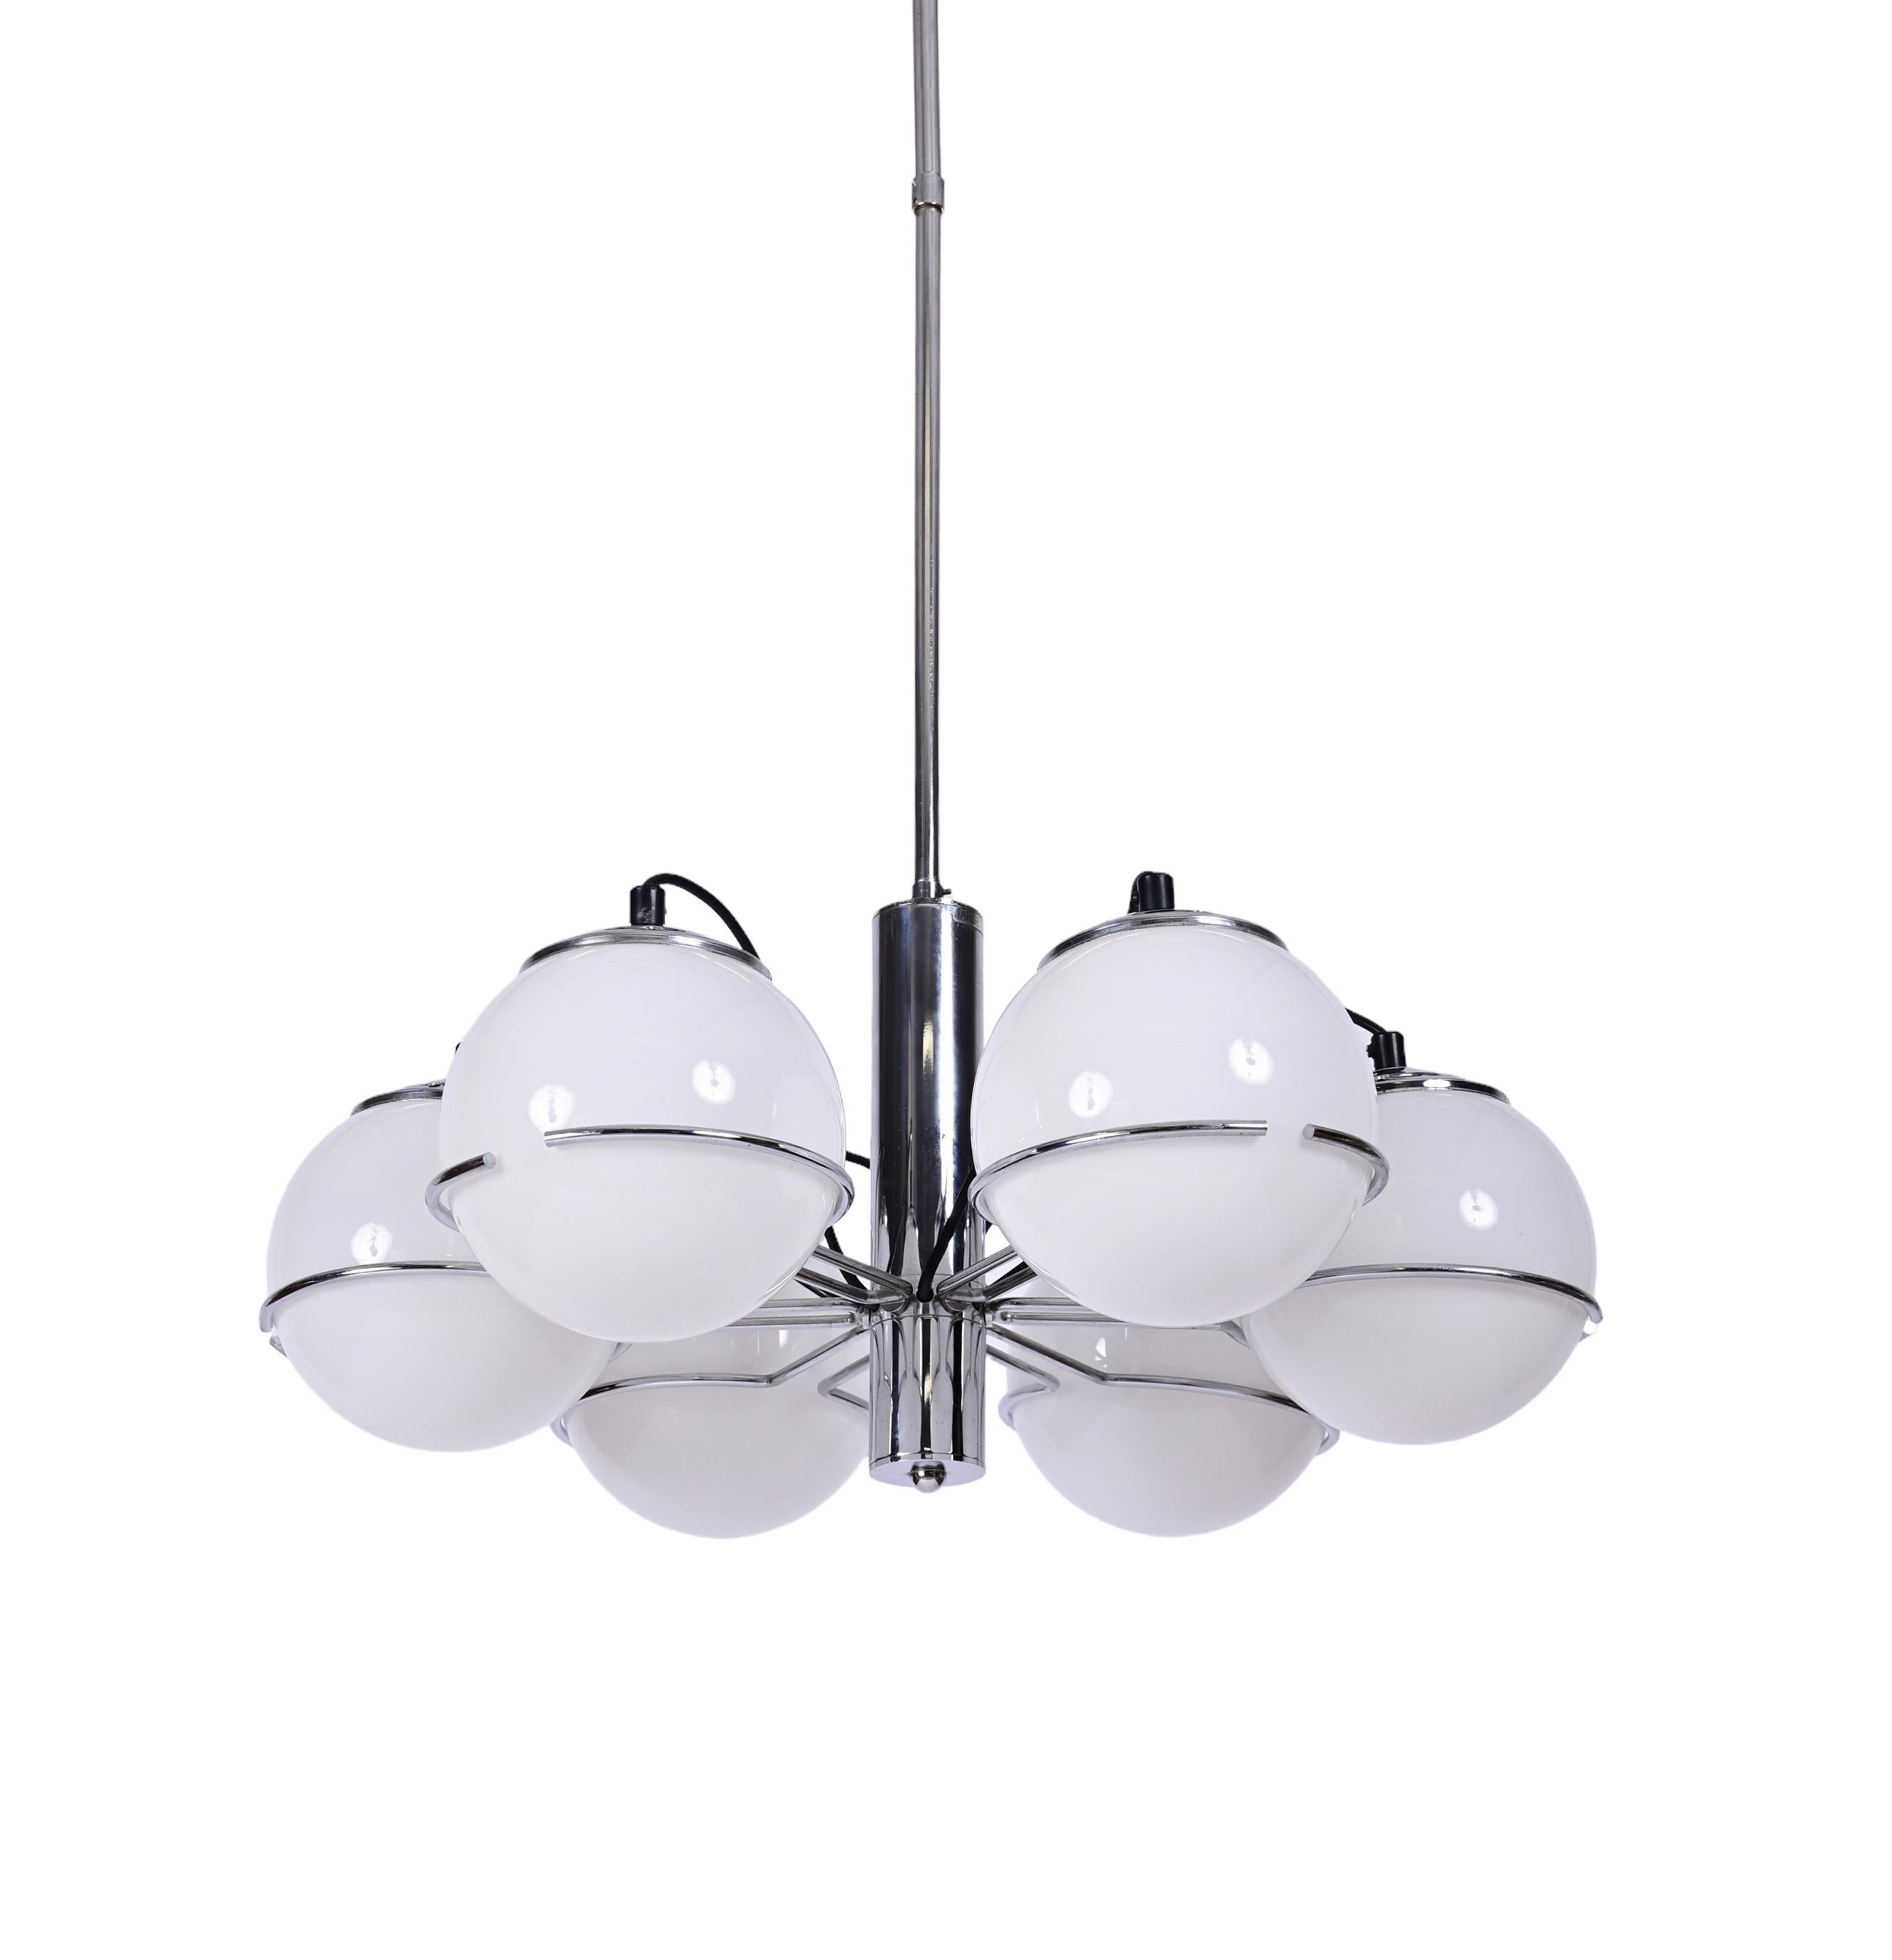 Amazing midcentury chrome and opaline white glass chandelier. Targetti Sankey designed this fantastic piece in Italy during the 1970s.

This item is fantastic as it comes with six white glass opal globes, floating in the chromed frame and a